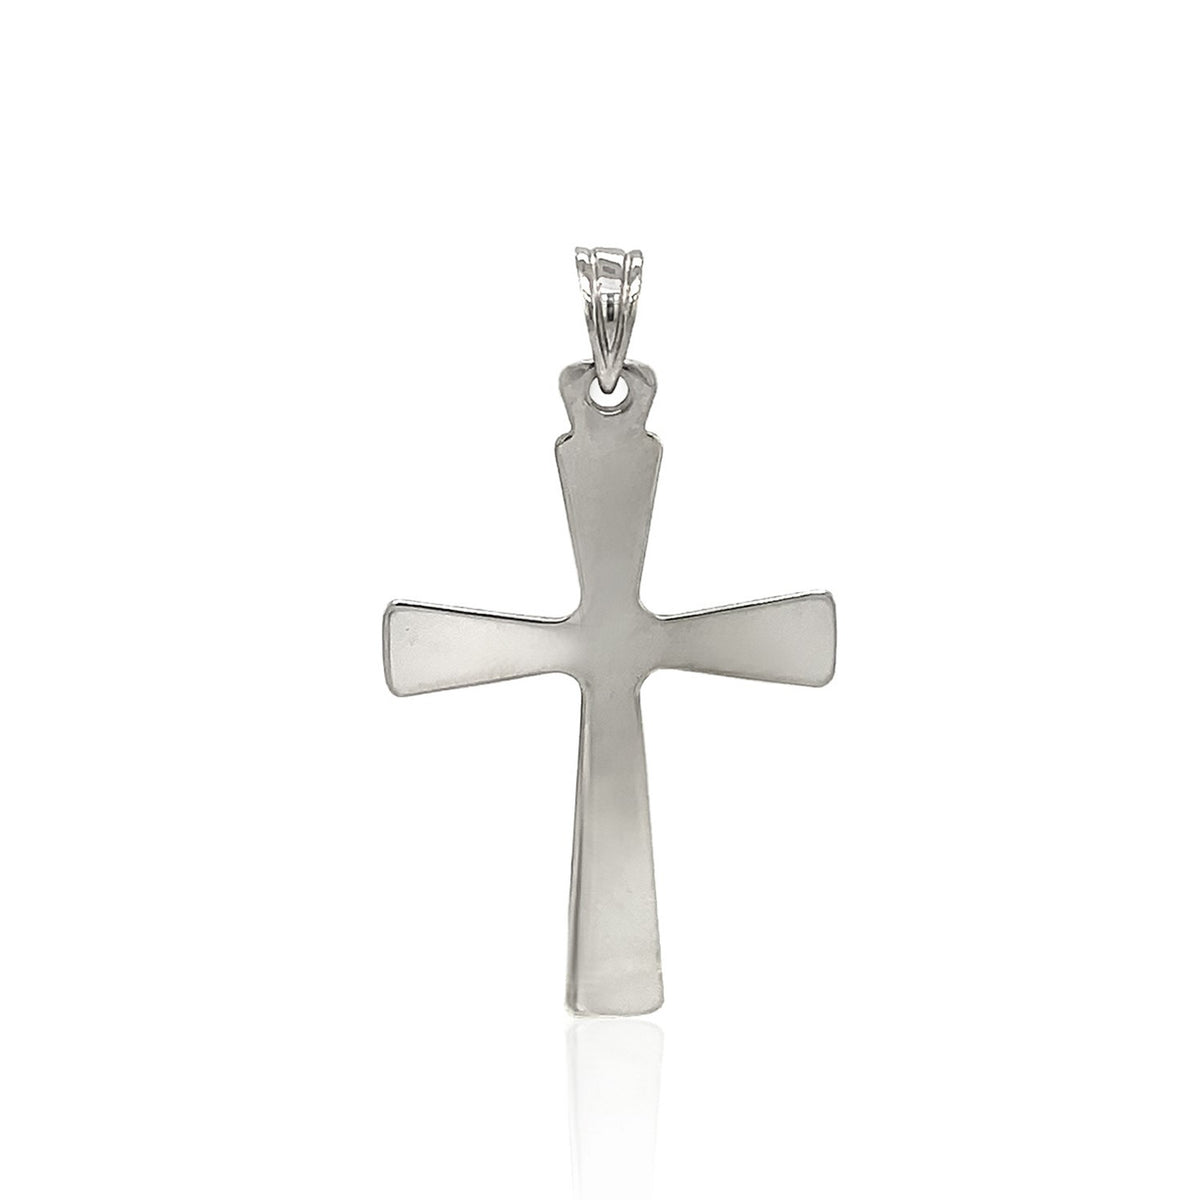 Domed Rounded Cross Pendant - Sterling Silver